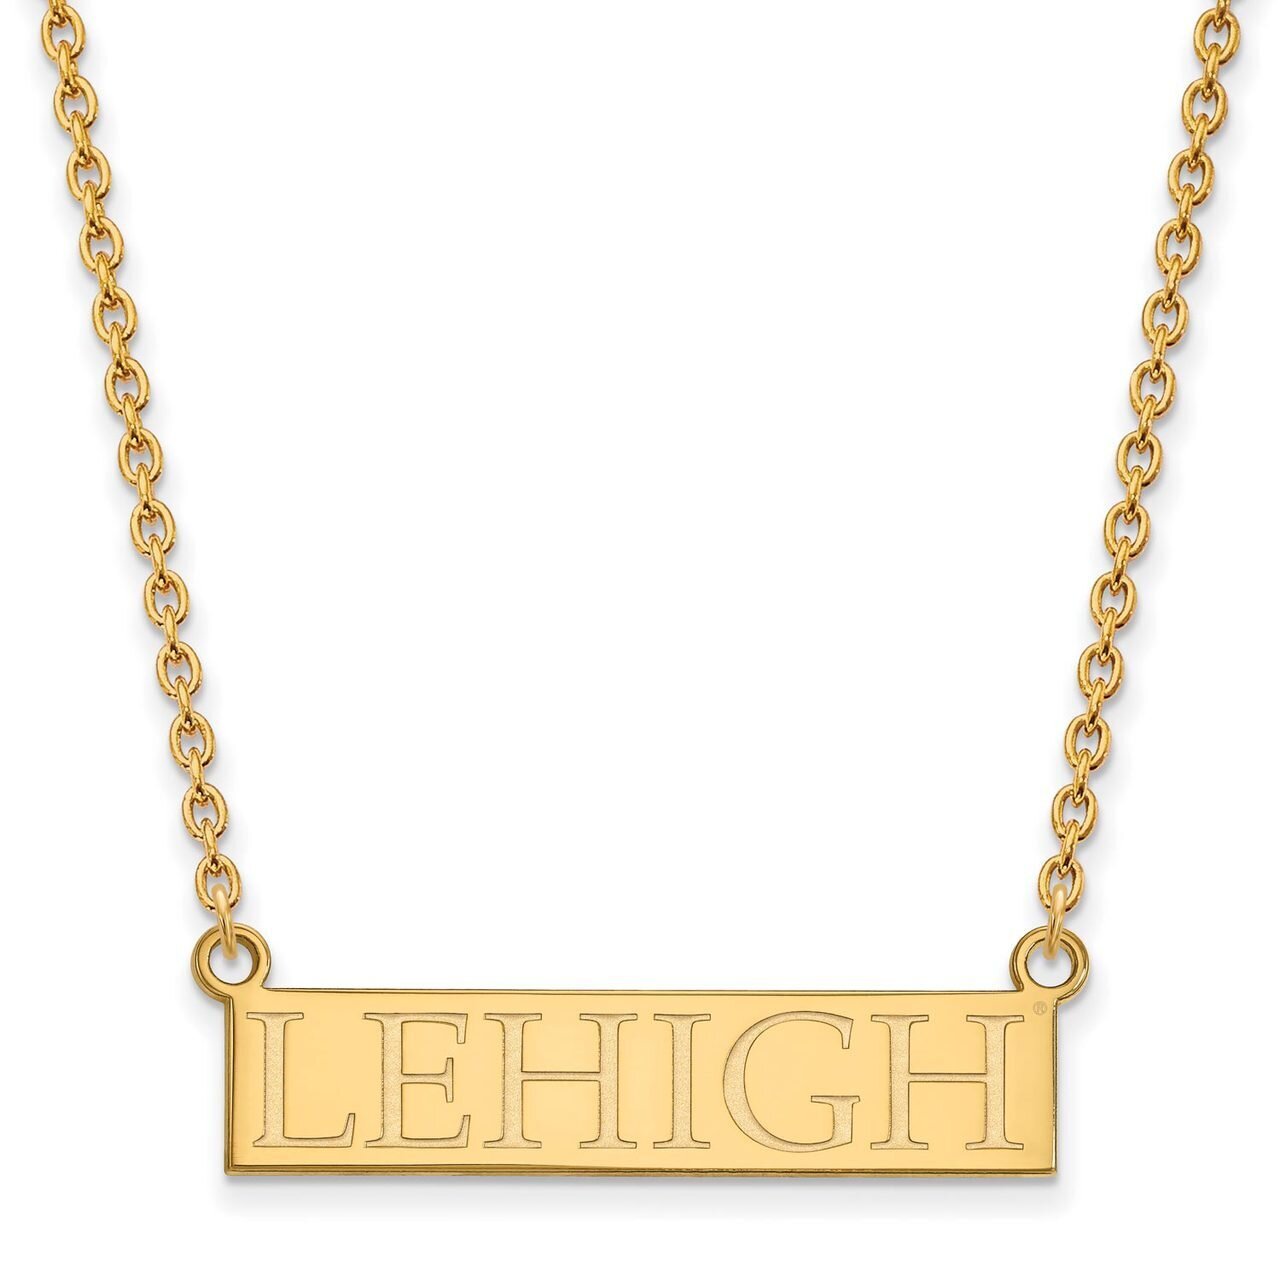 Lehigh University Large Pendant with Chain Necklace 10k Yellow Gold 1Y007LHU-18